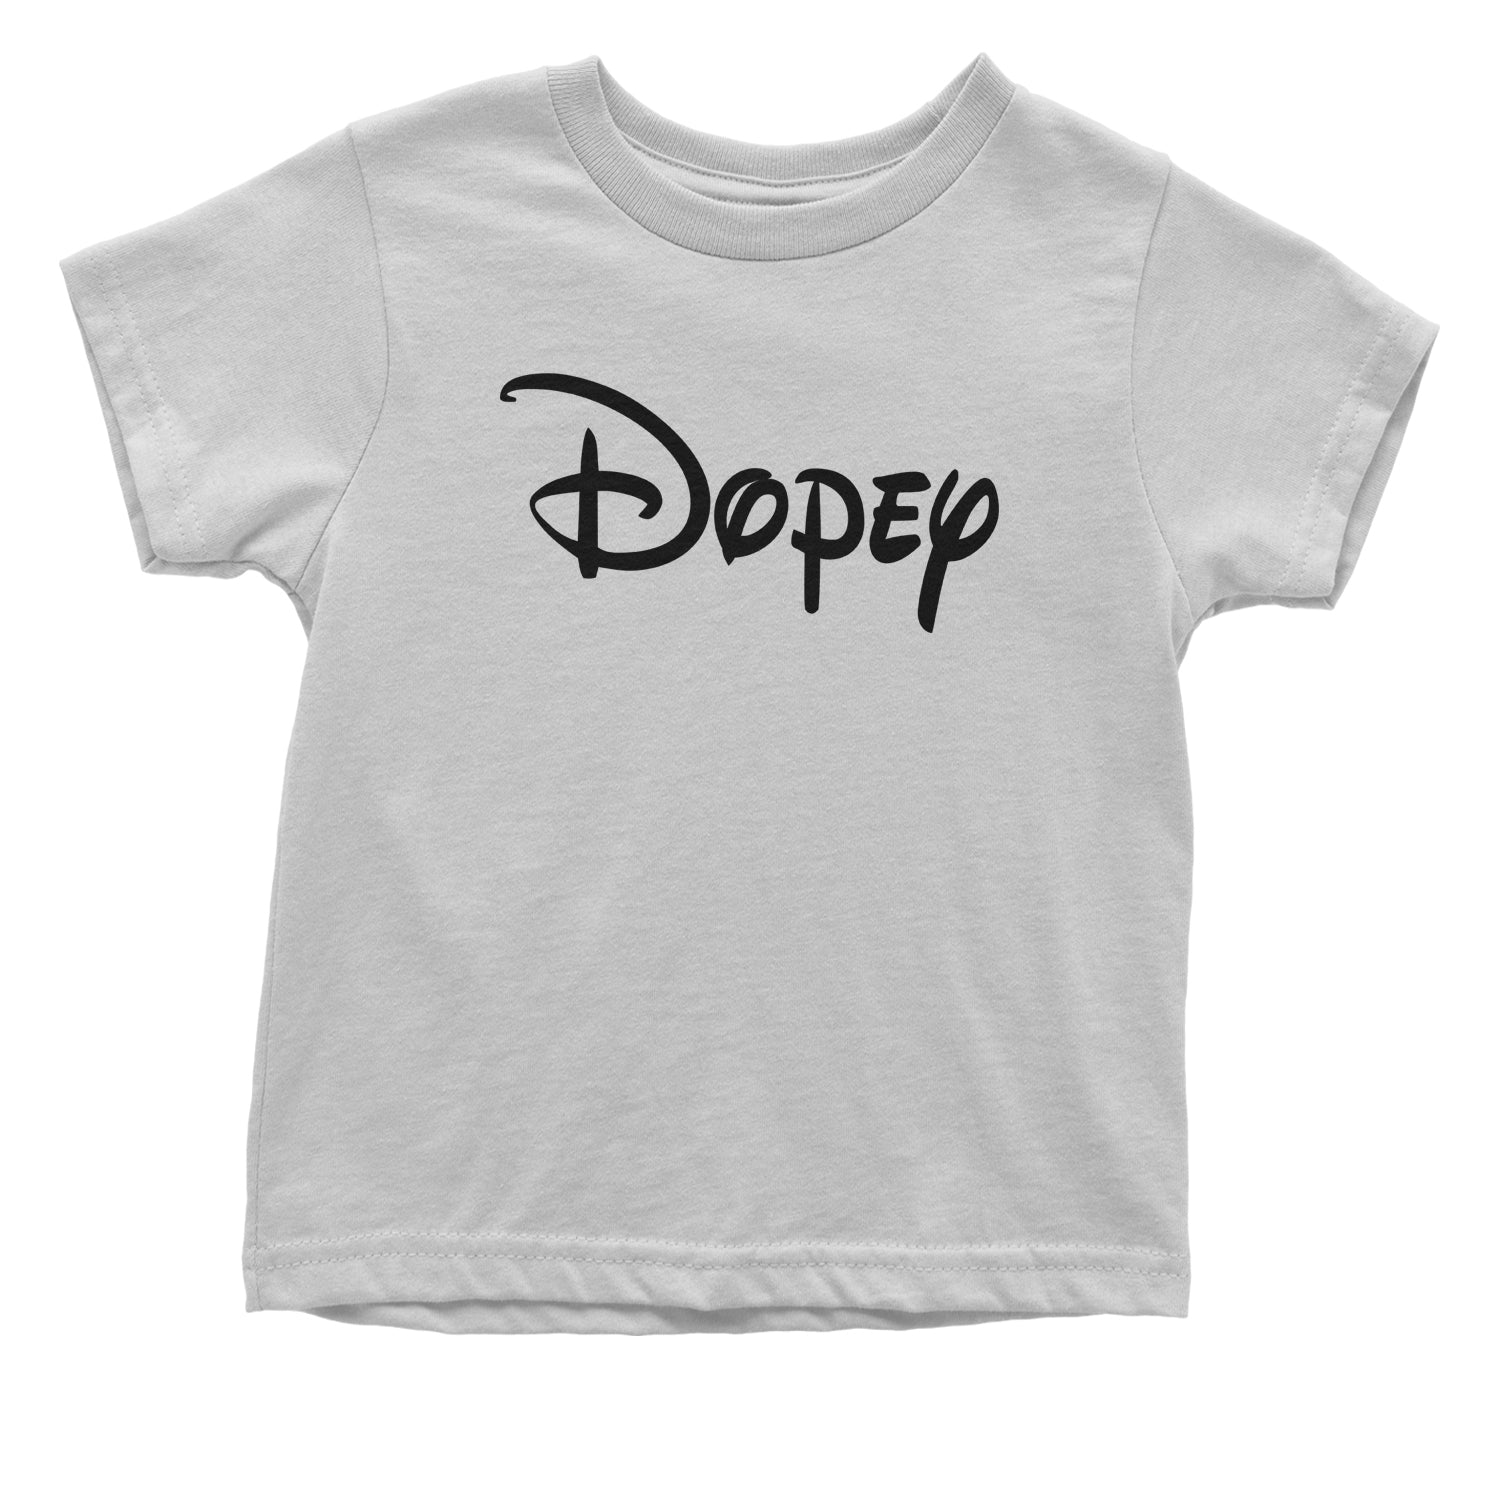 Dopey - 7 Dwarfs Costume Toddler T-Shirt and, costume, dwarfs, group, halloween, matching, seven, snow, the, white by Expression Tees